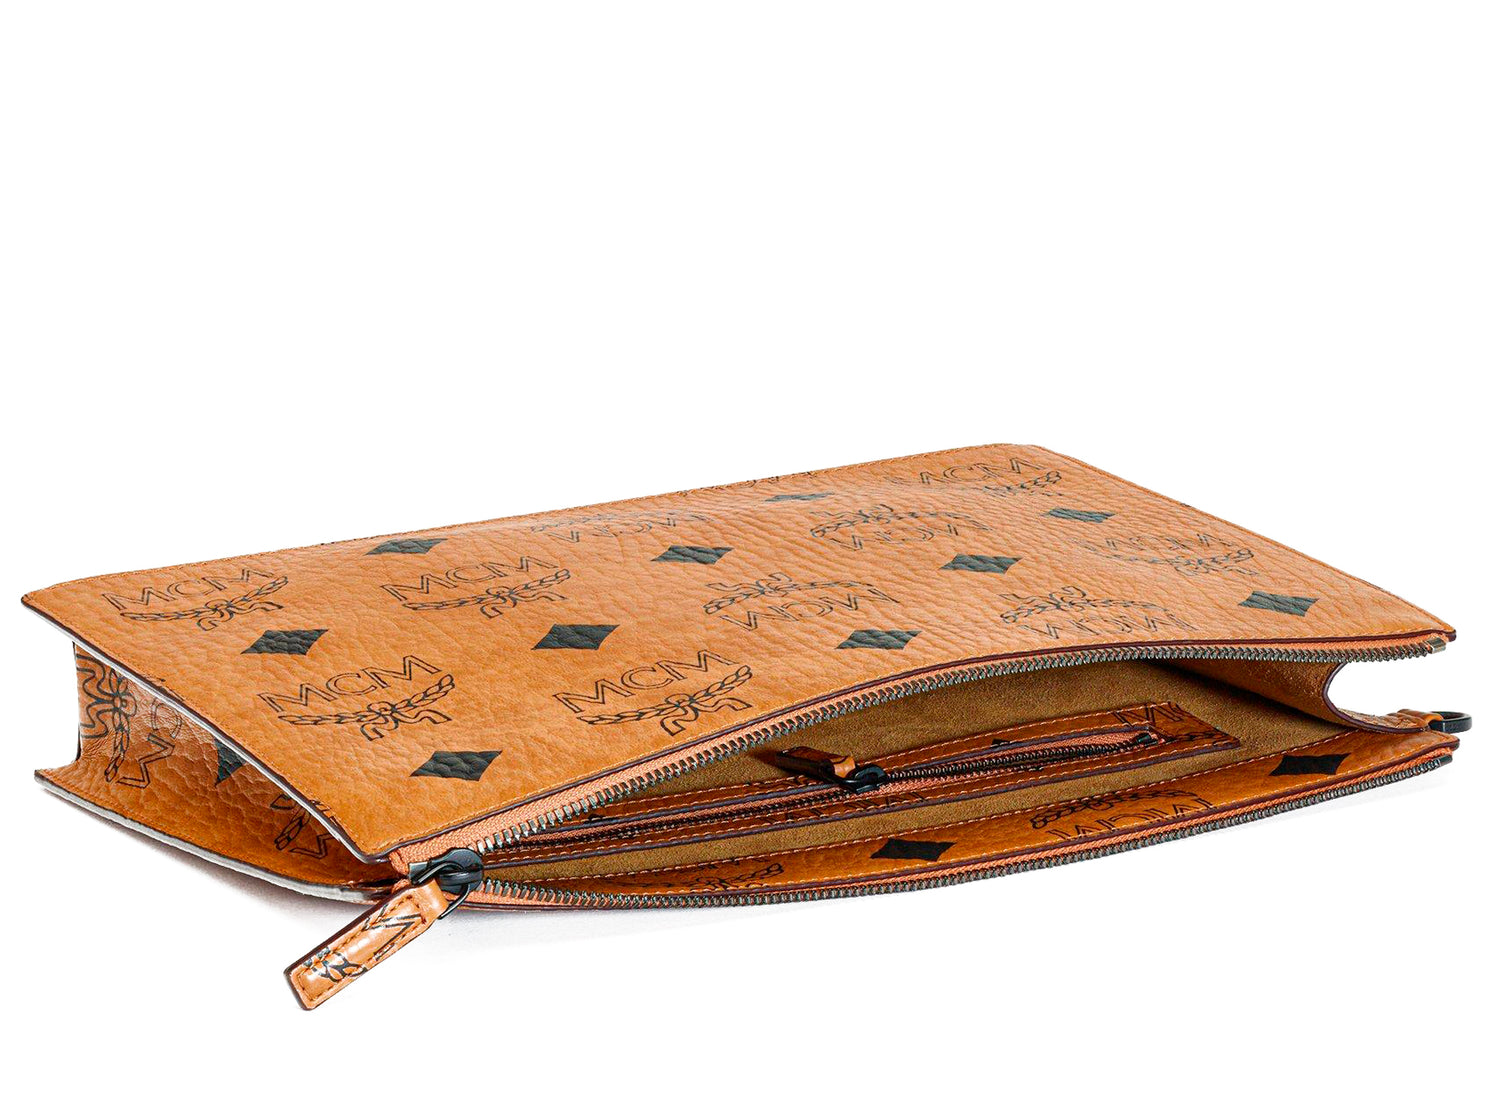 Flat Pouch Medium - Brown leather pouch